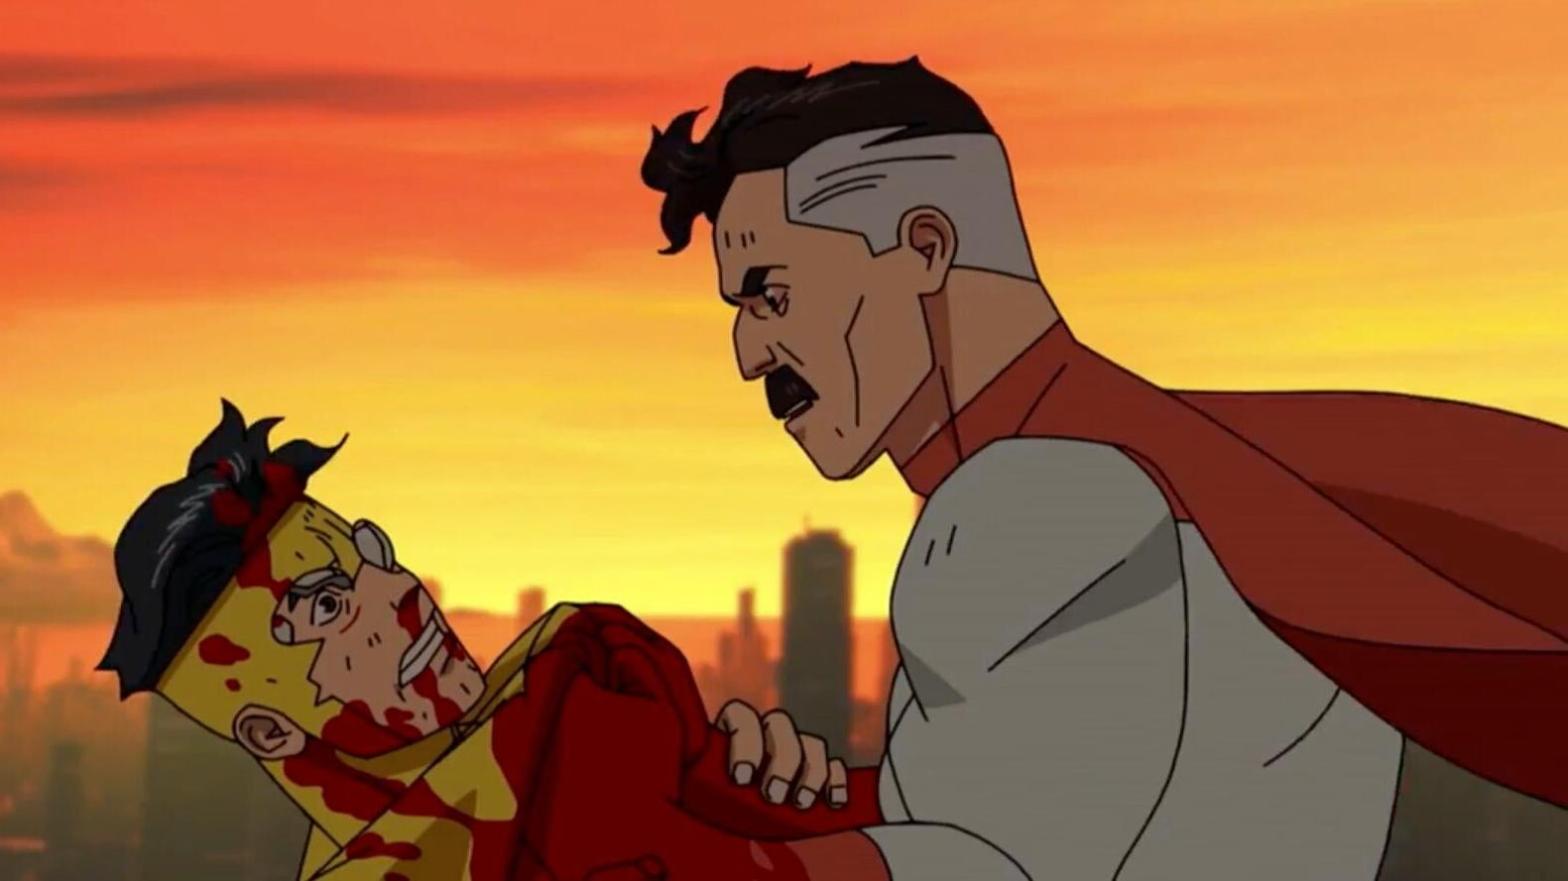 Still image from Invincible (Image: Amazon)